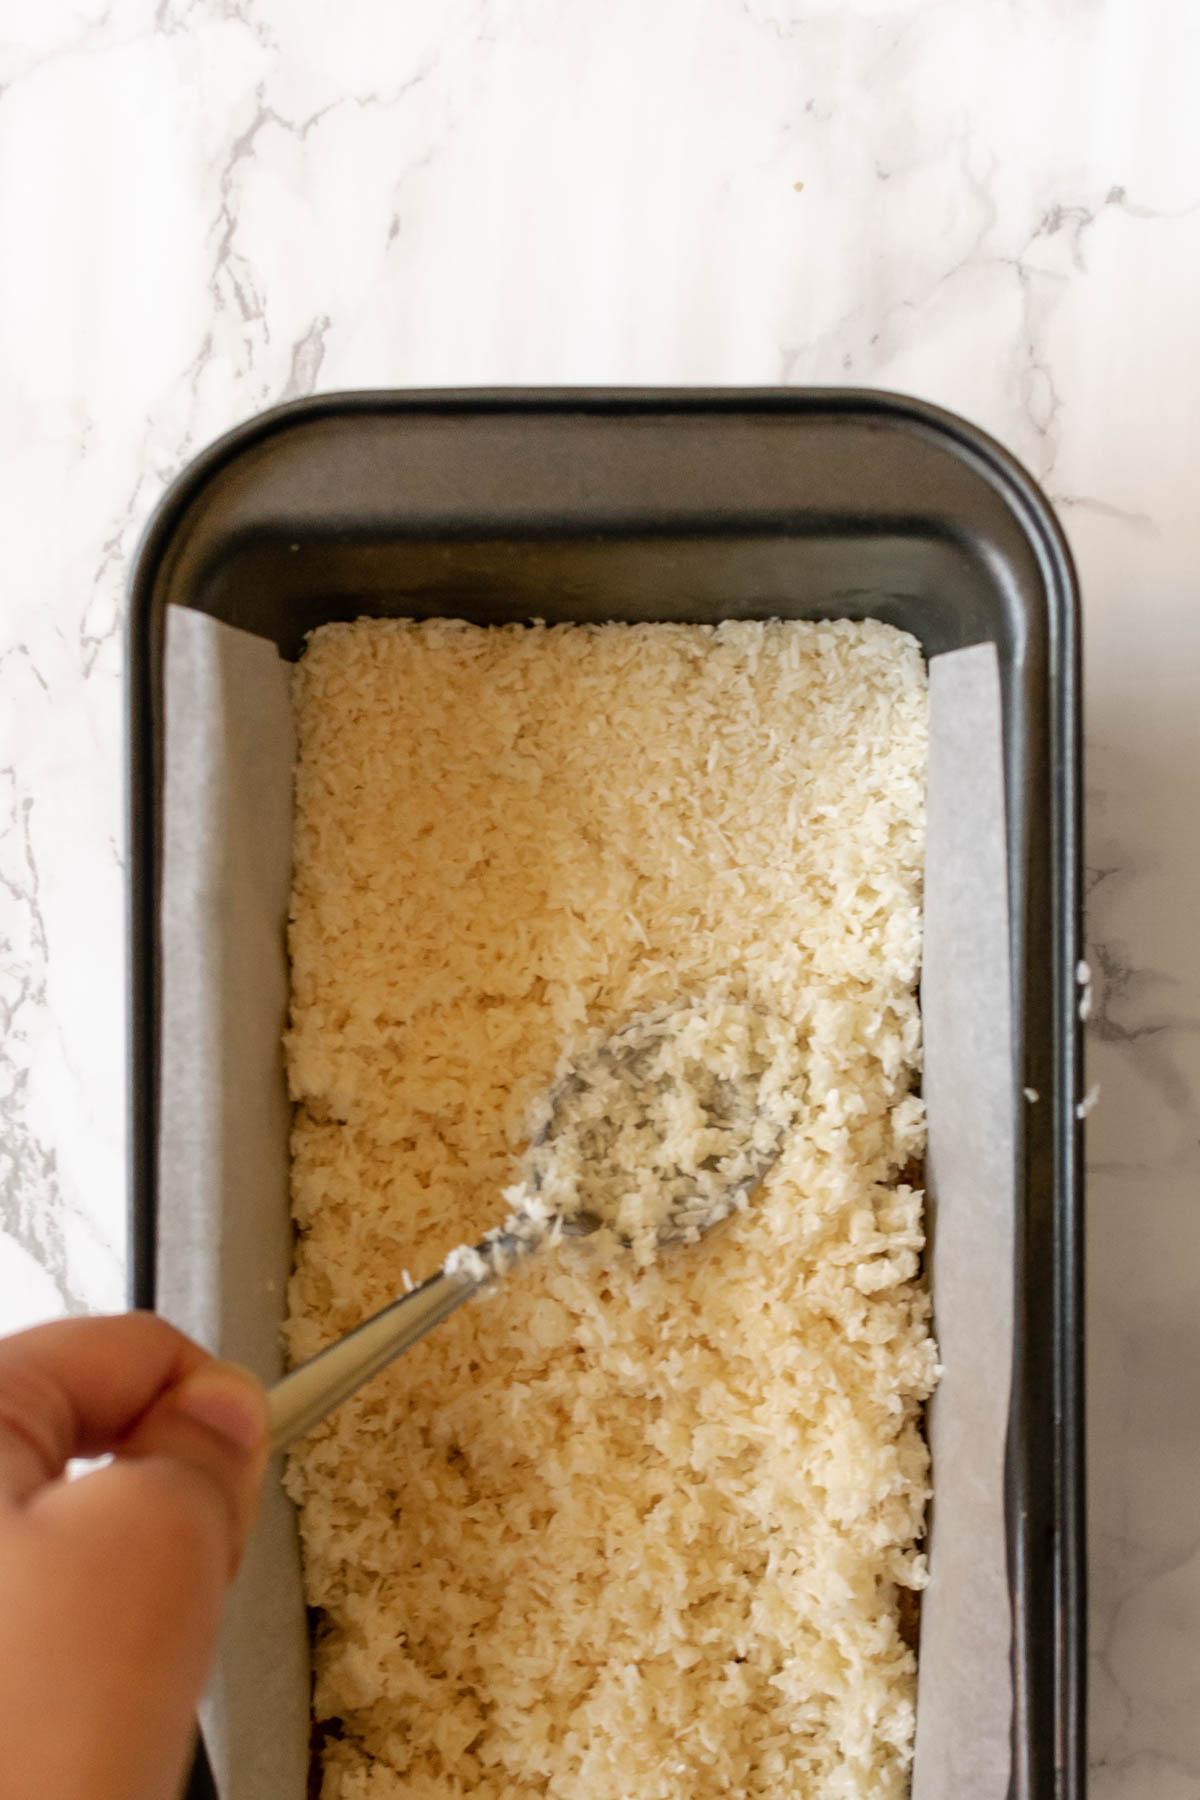 coconut filling being pressed into a loaf tin